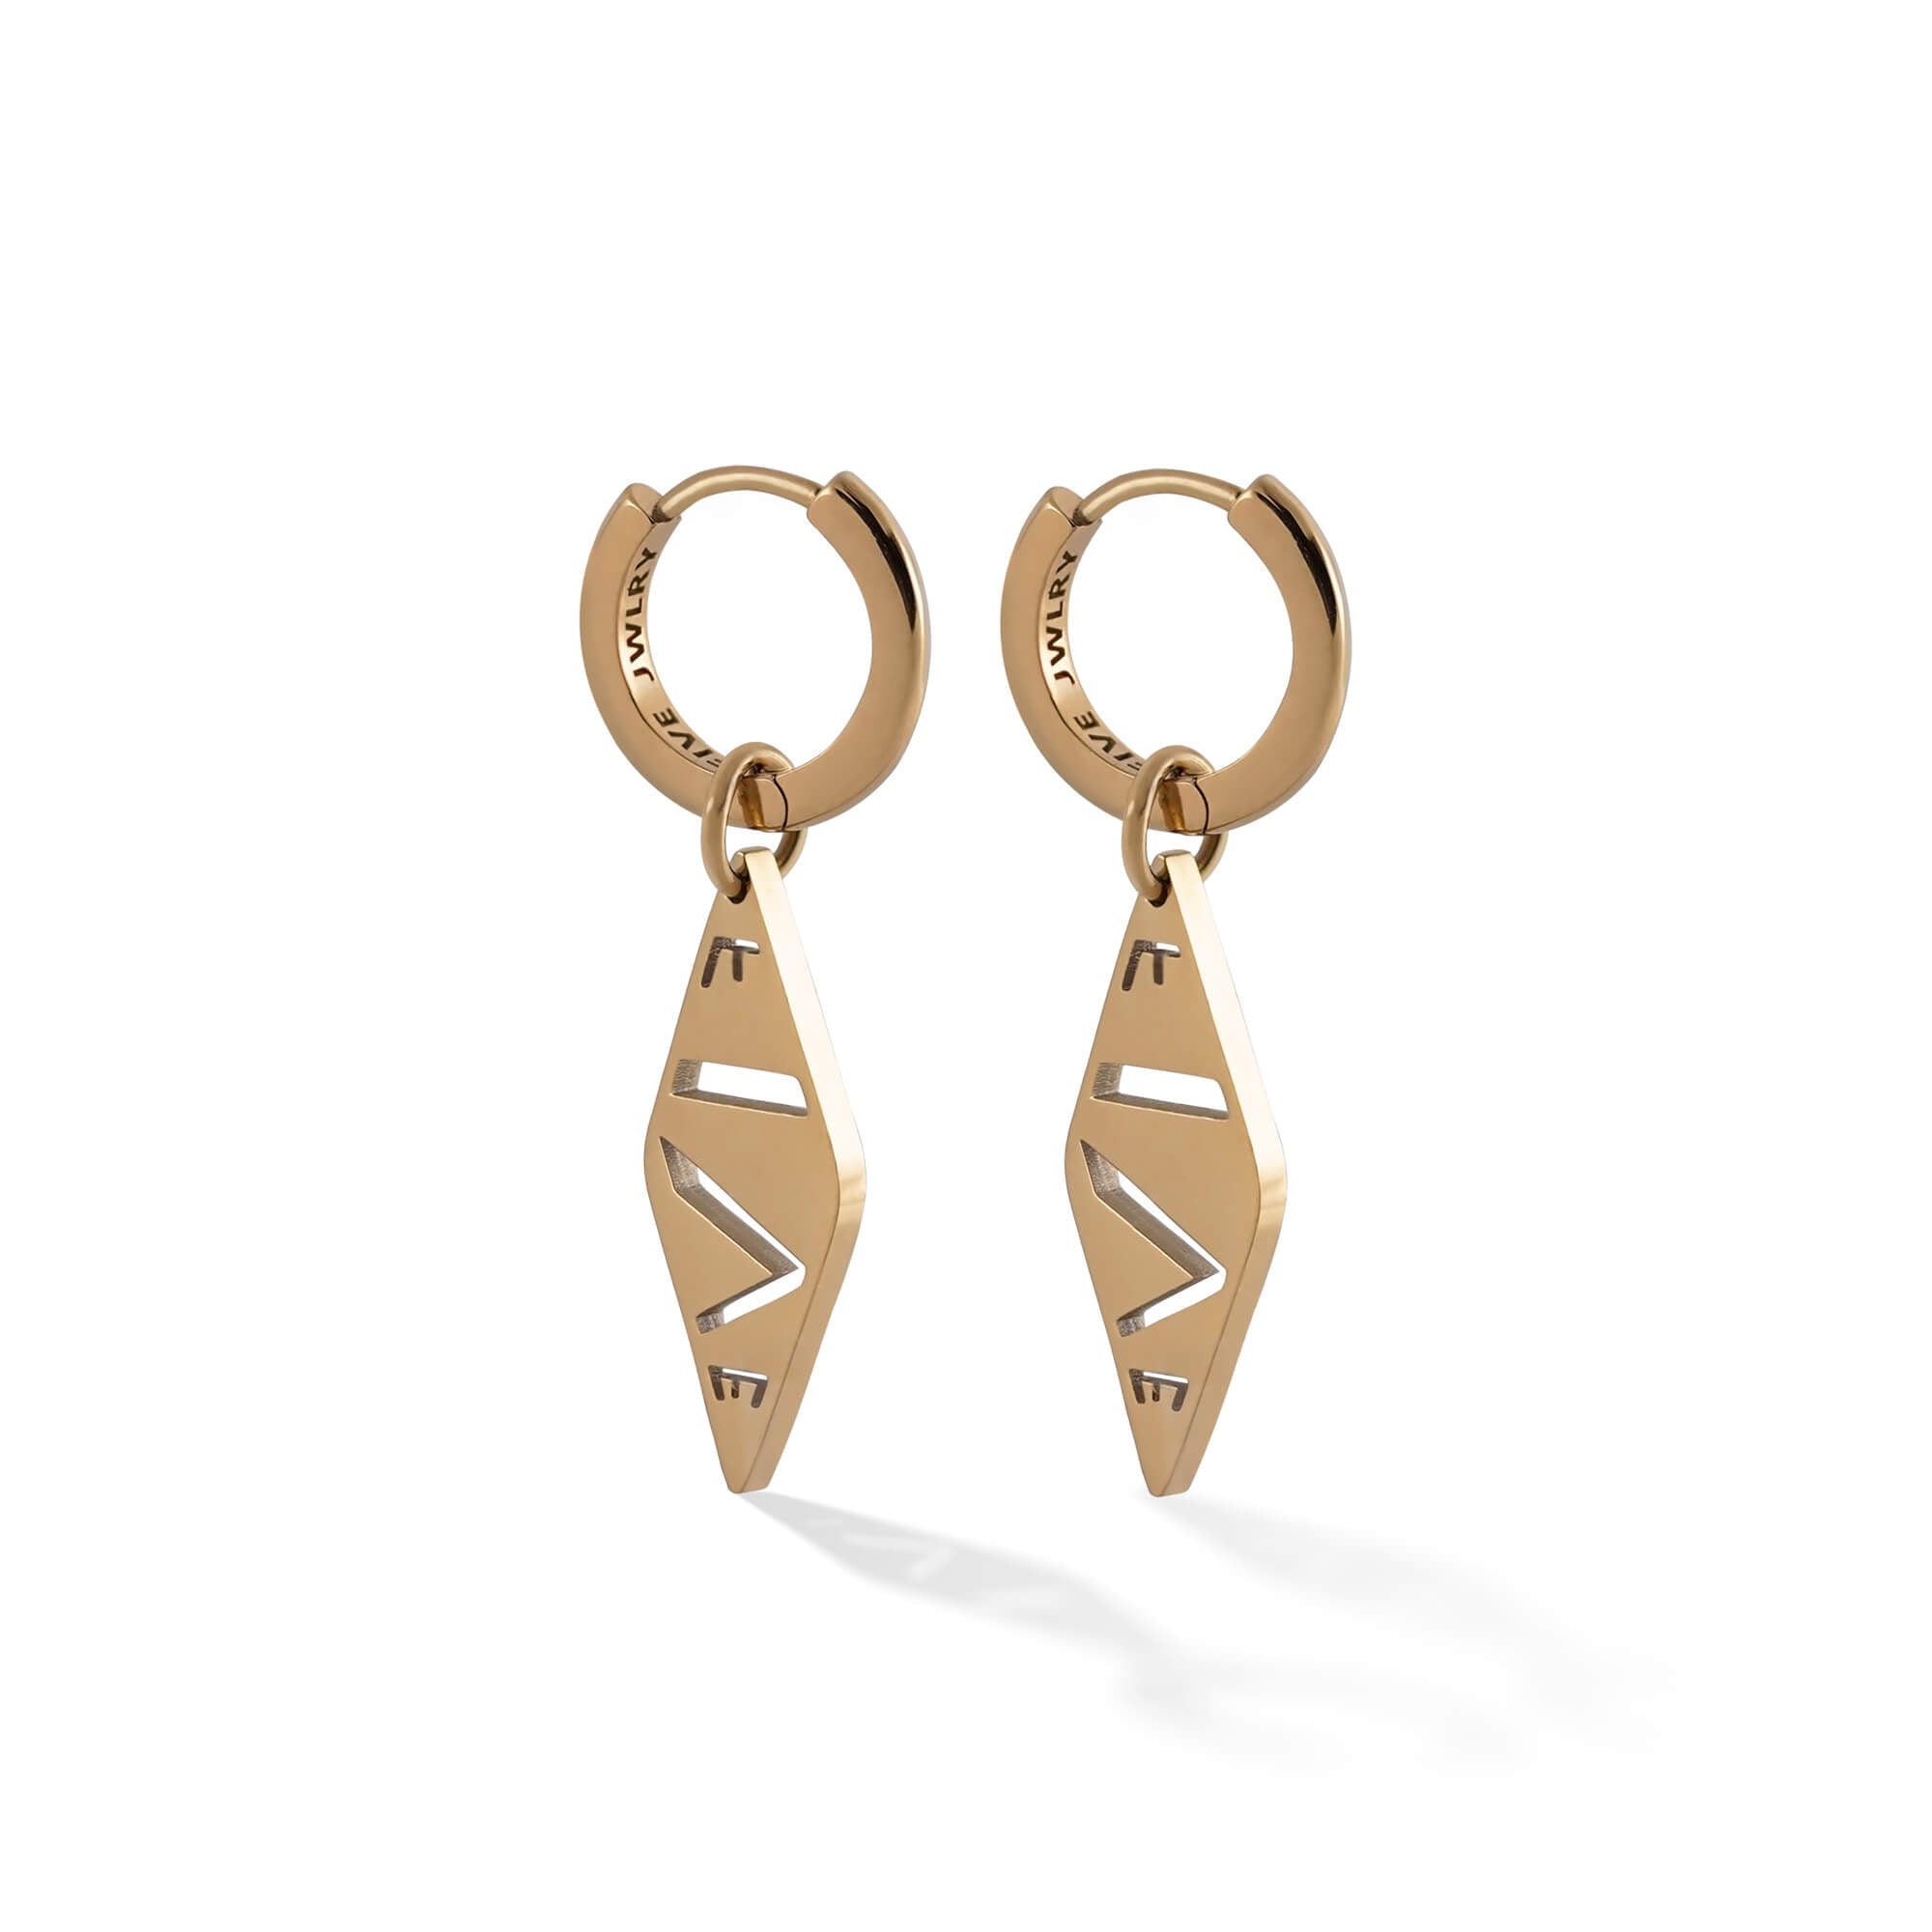 SOCA men's earring by Five Jwlry. A sleek 13mm hoop, enhanced with the signature FIVE lozenge hoop charm. Option to choose between a single earring or a pair. Available in 14k gold or silver, crafted from water-resistant 316L stainless steel. Hypoallergenic with a 2-year warranty.